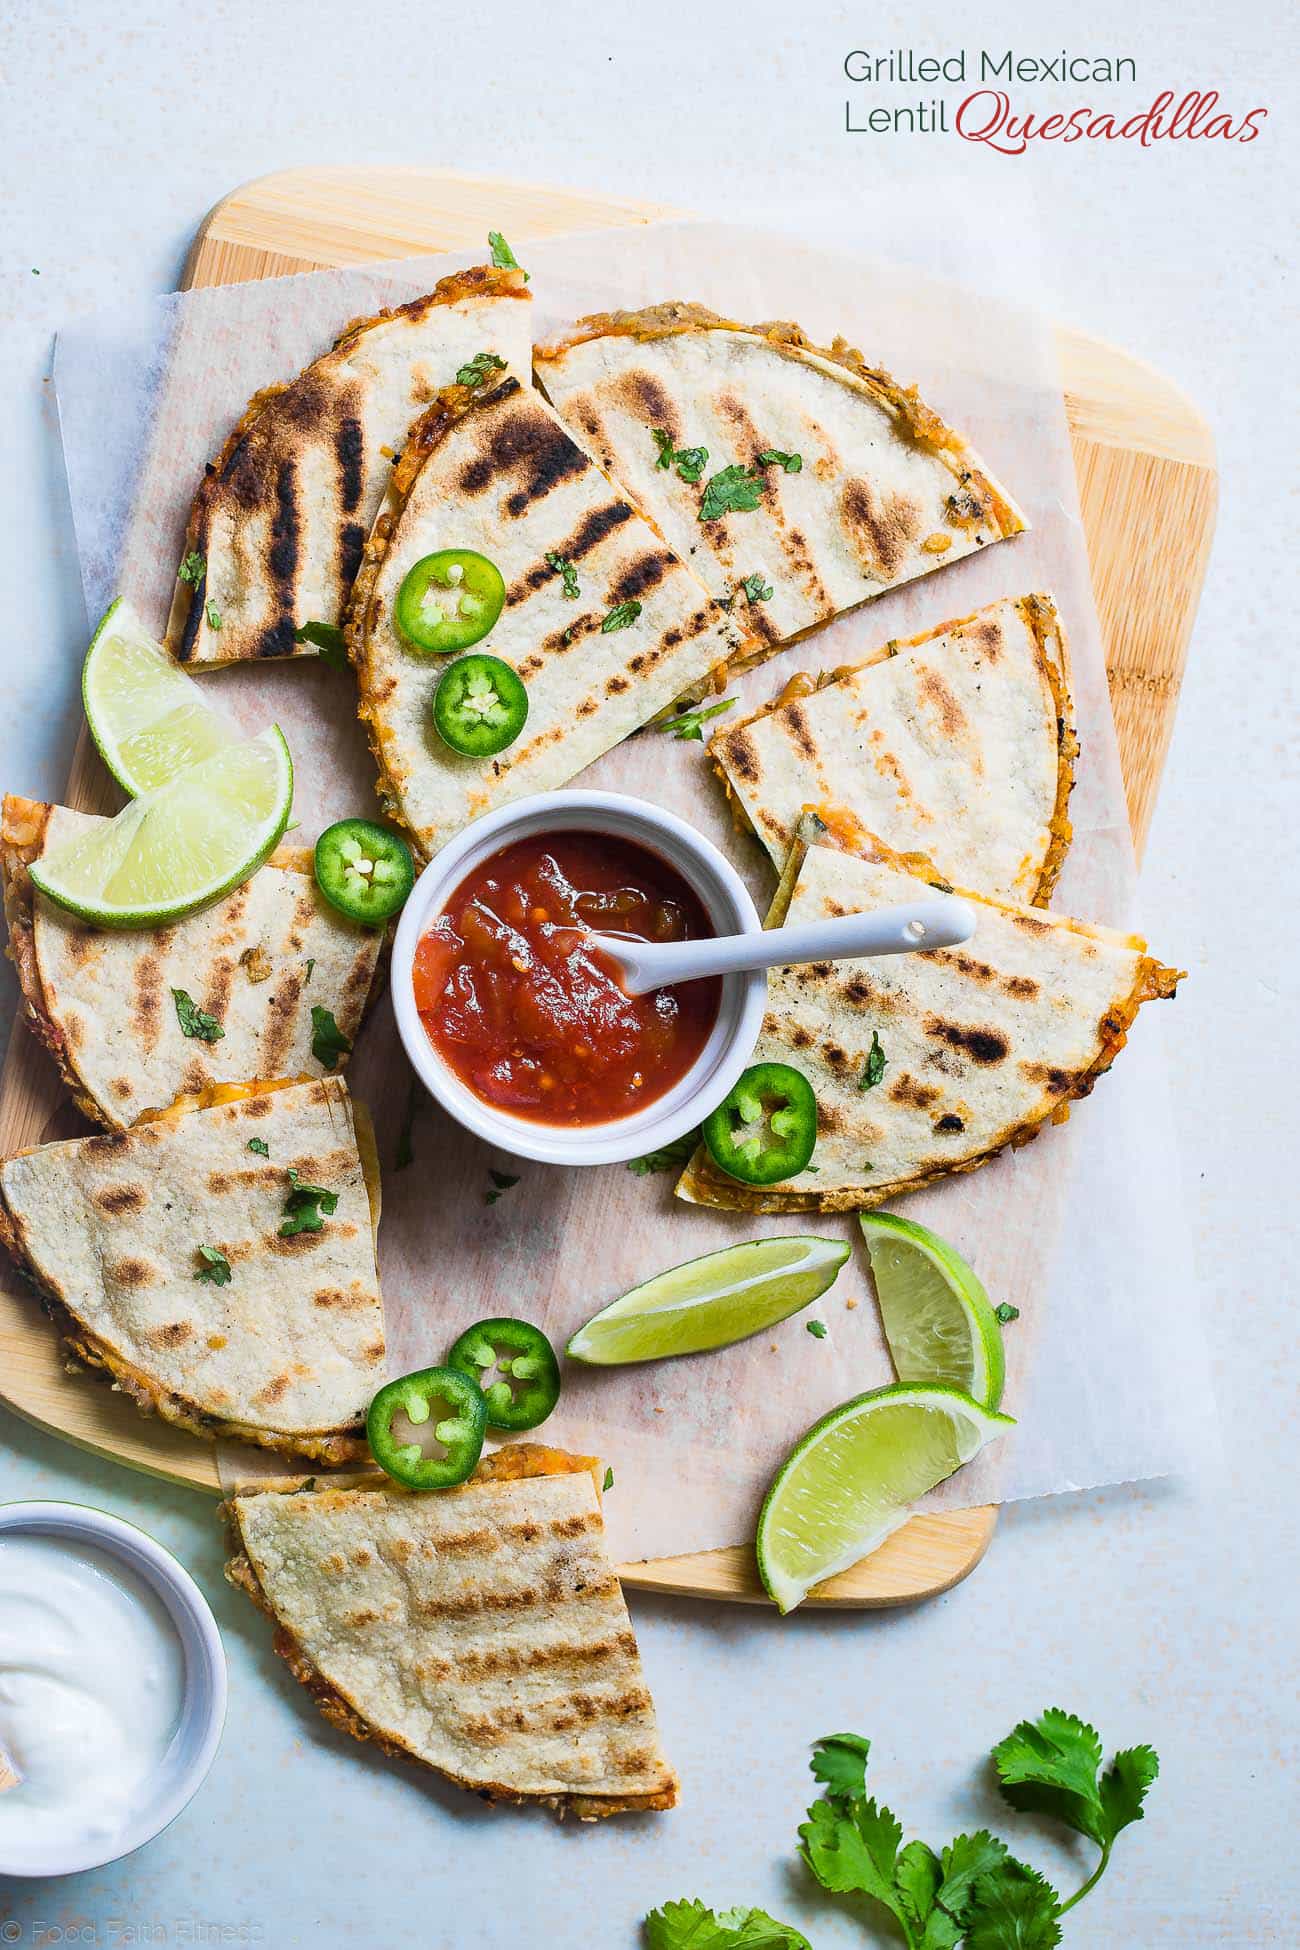 Grilled Mexican Lentil Quesadillas stacked on a cutting board. Recipe on Foodfaithfitness.com